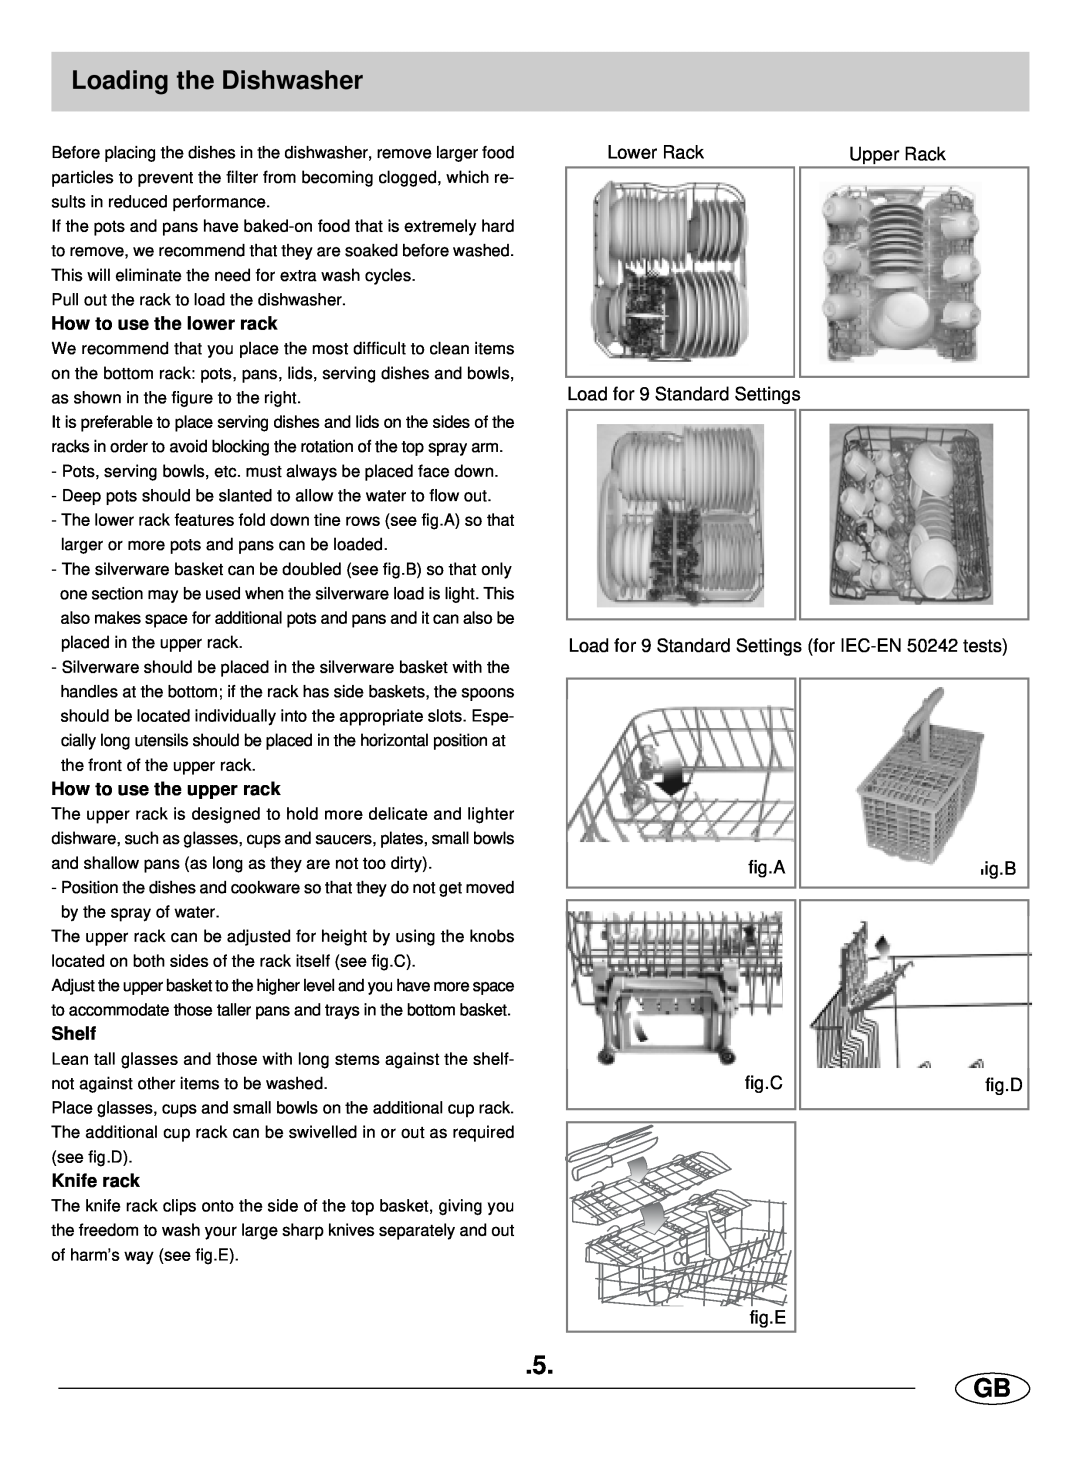 Haier DW9-LBE manual Loading the Dishwasher, 5 GB, How to use the lower rack, How to use the upper rack, Shelf, Knife rack 